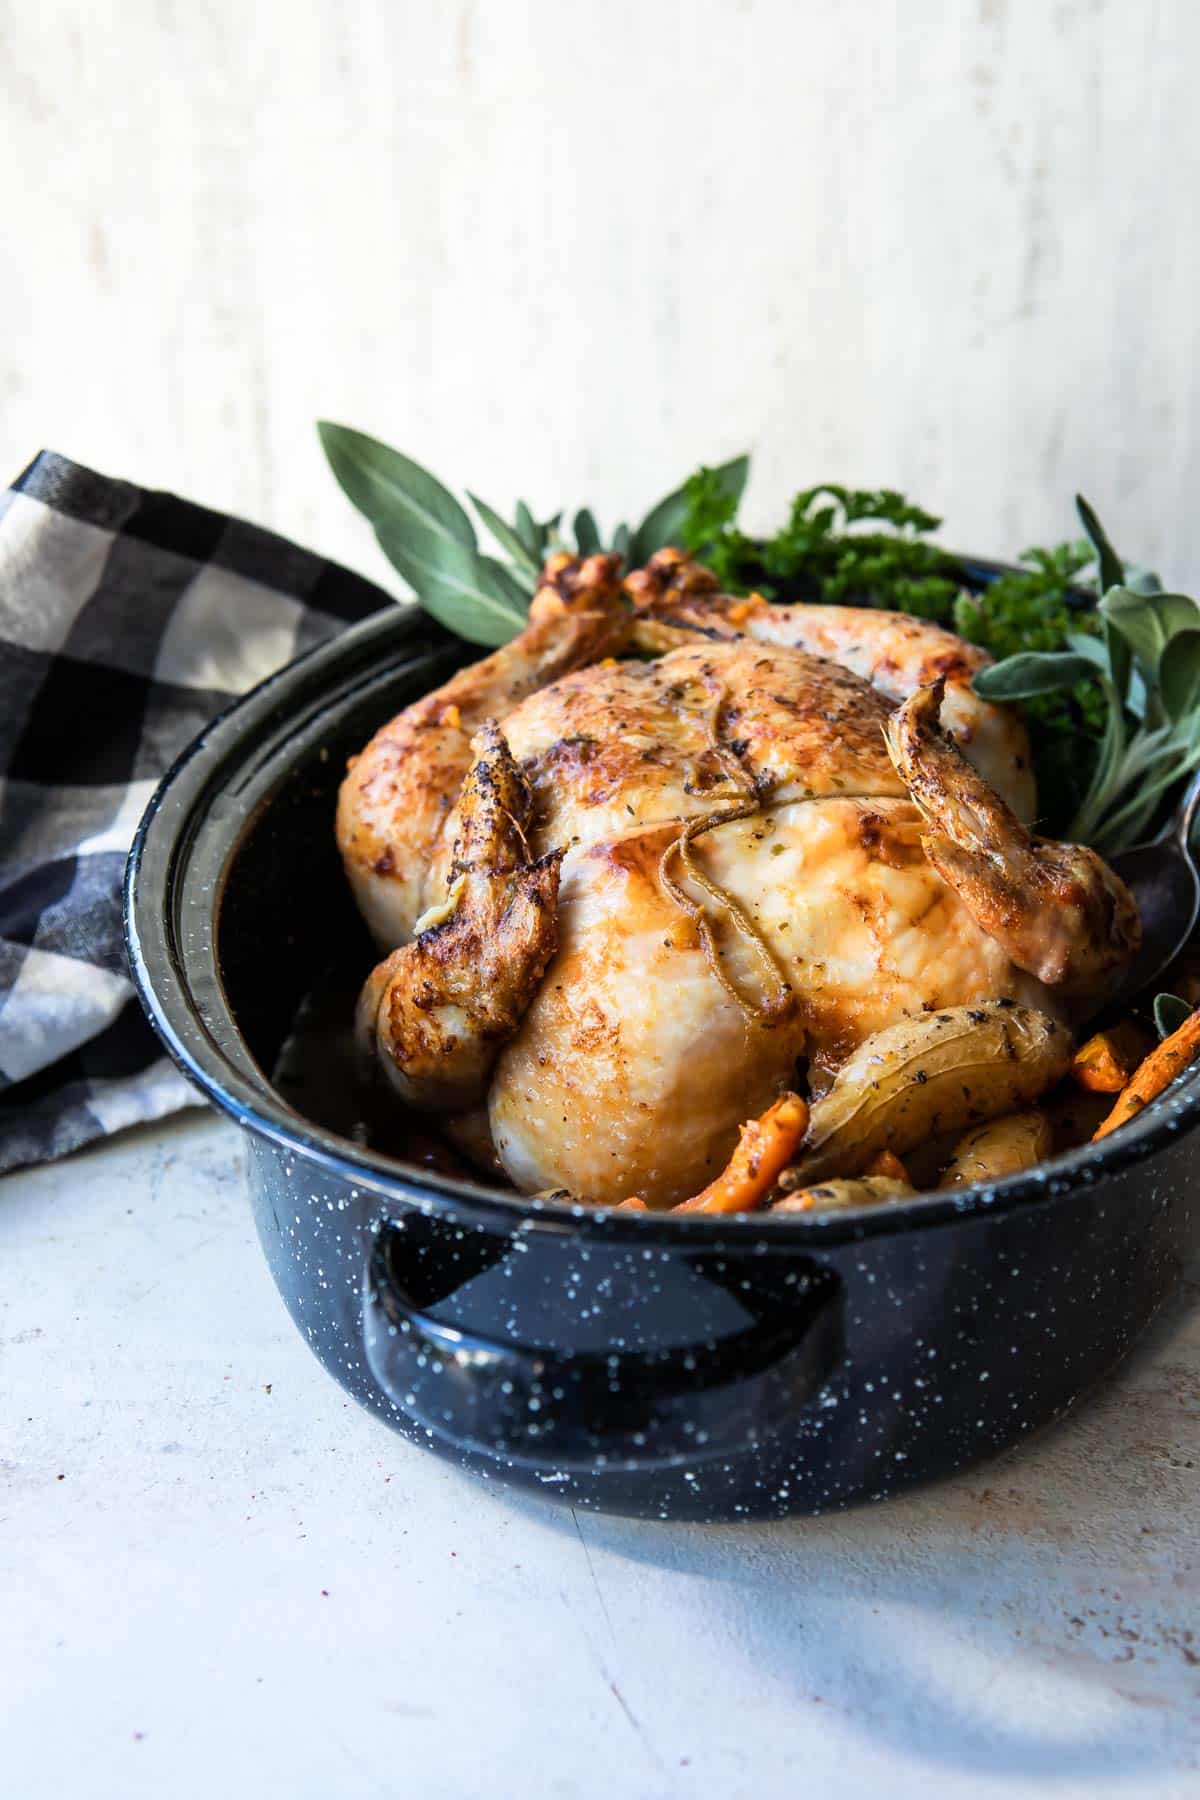 A whole roasted chicken in a graniteware pan.